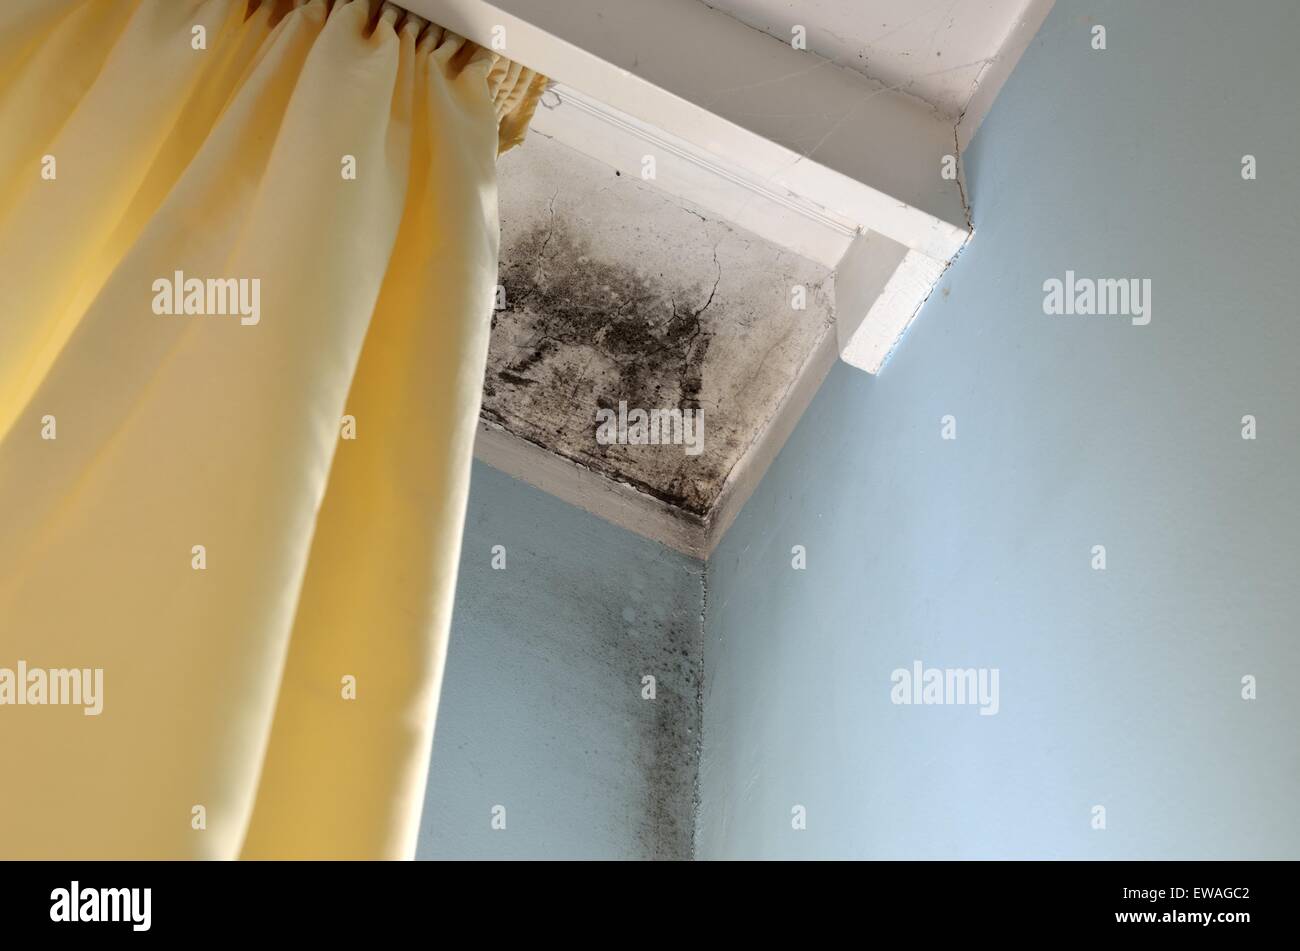 Mold In The Corner Of The White Ceiling And Blue Wall With